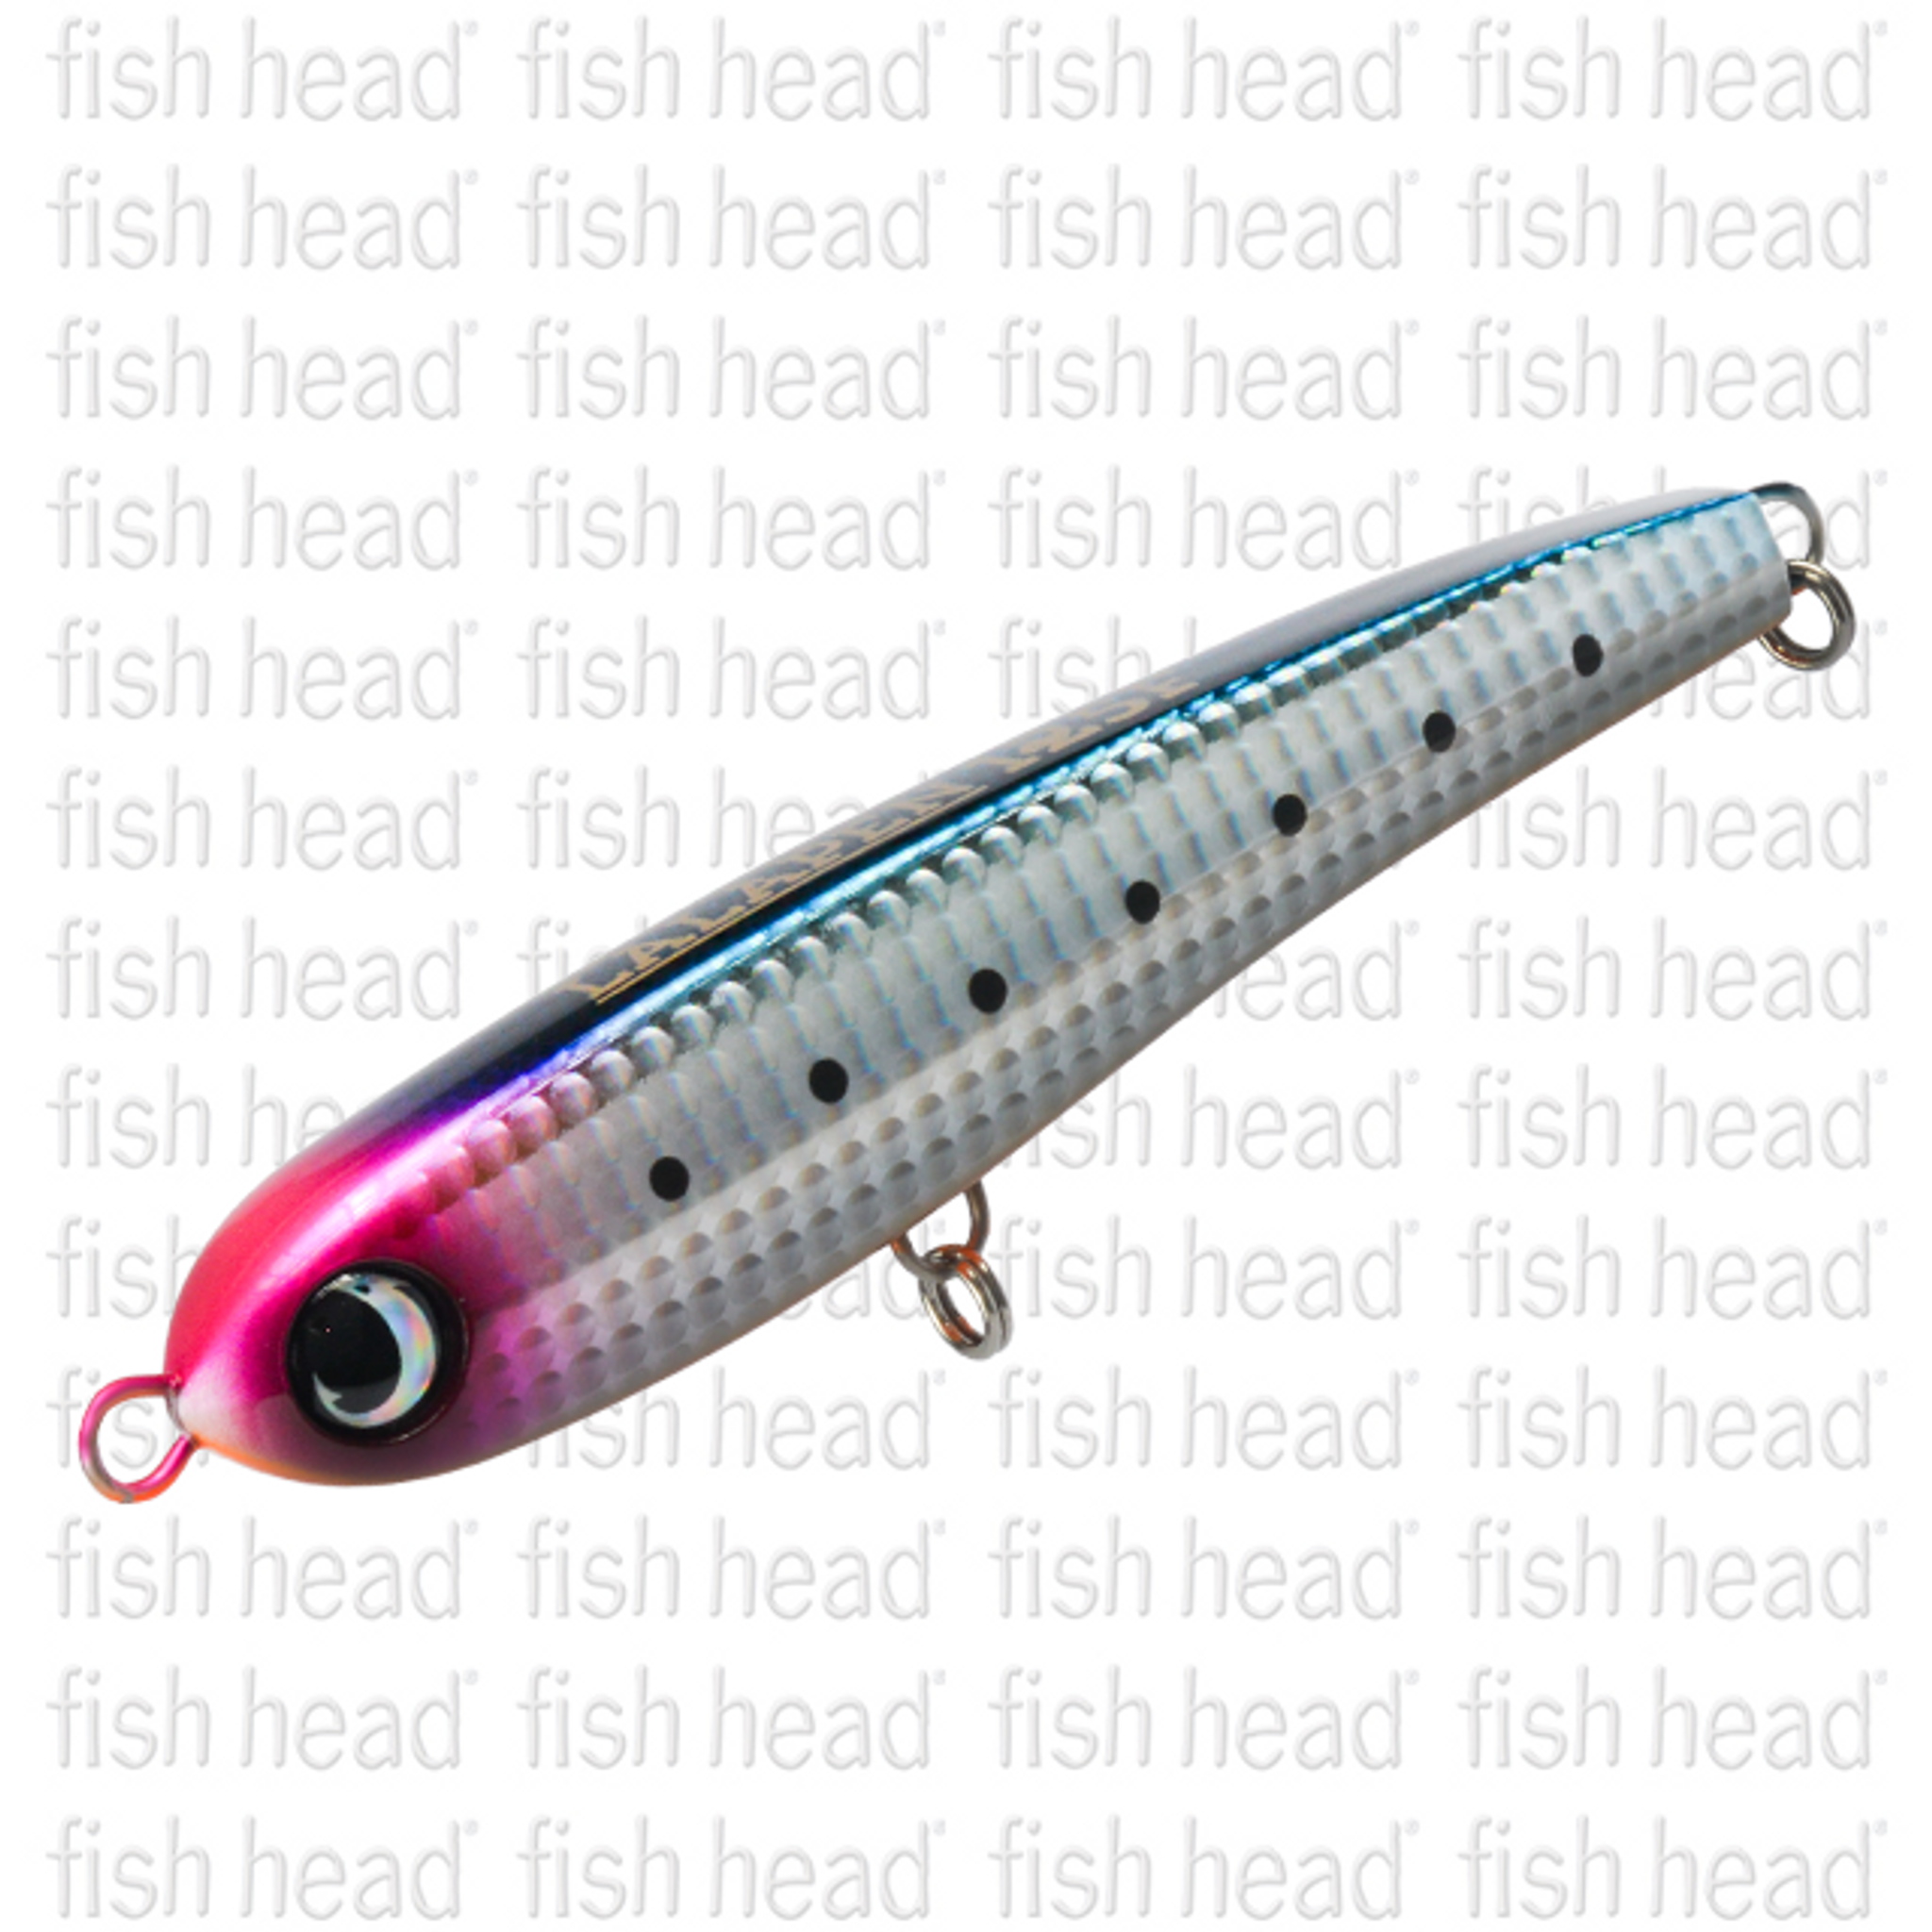 Jumprize Lalapen 125F - Fish Head